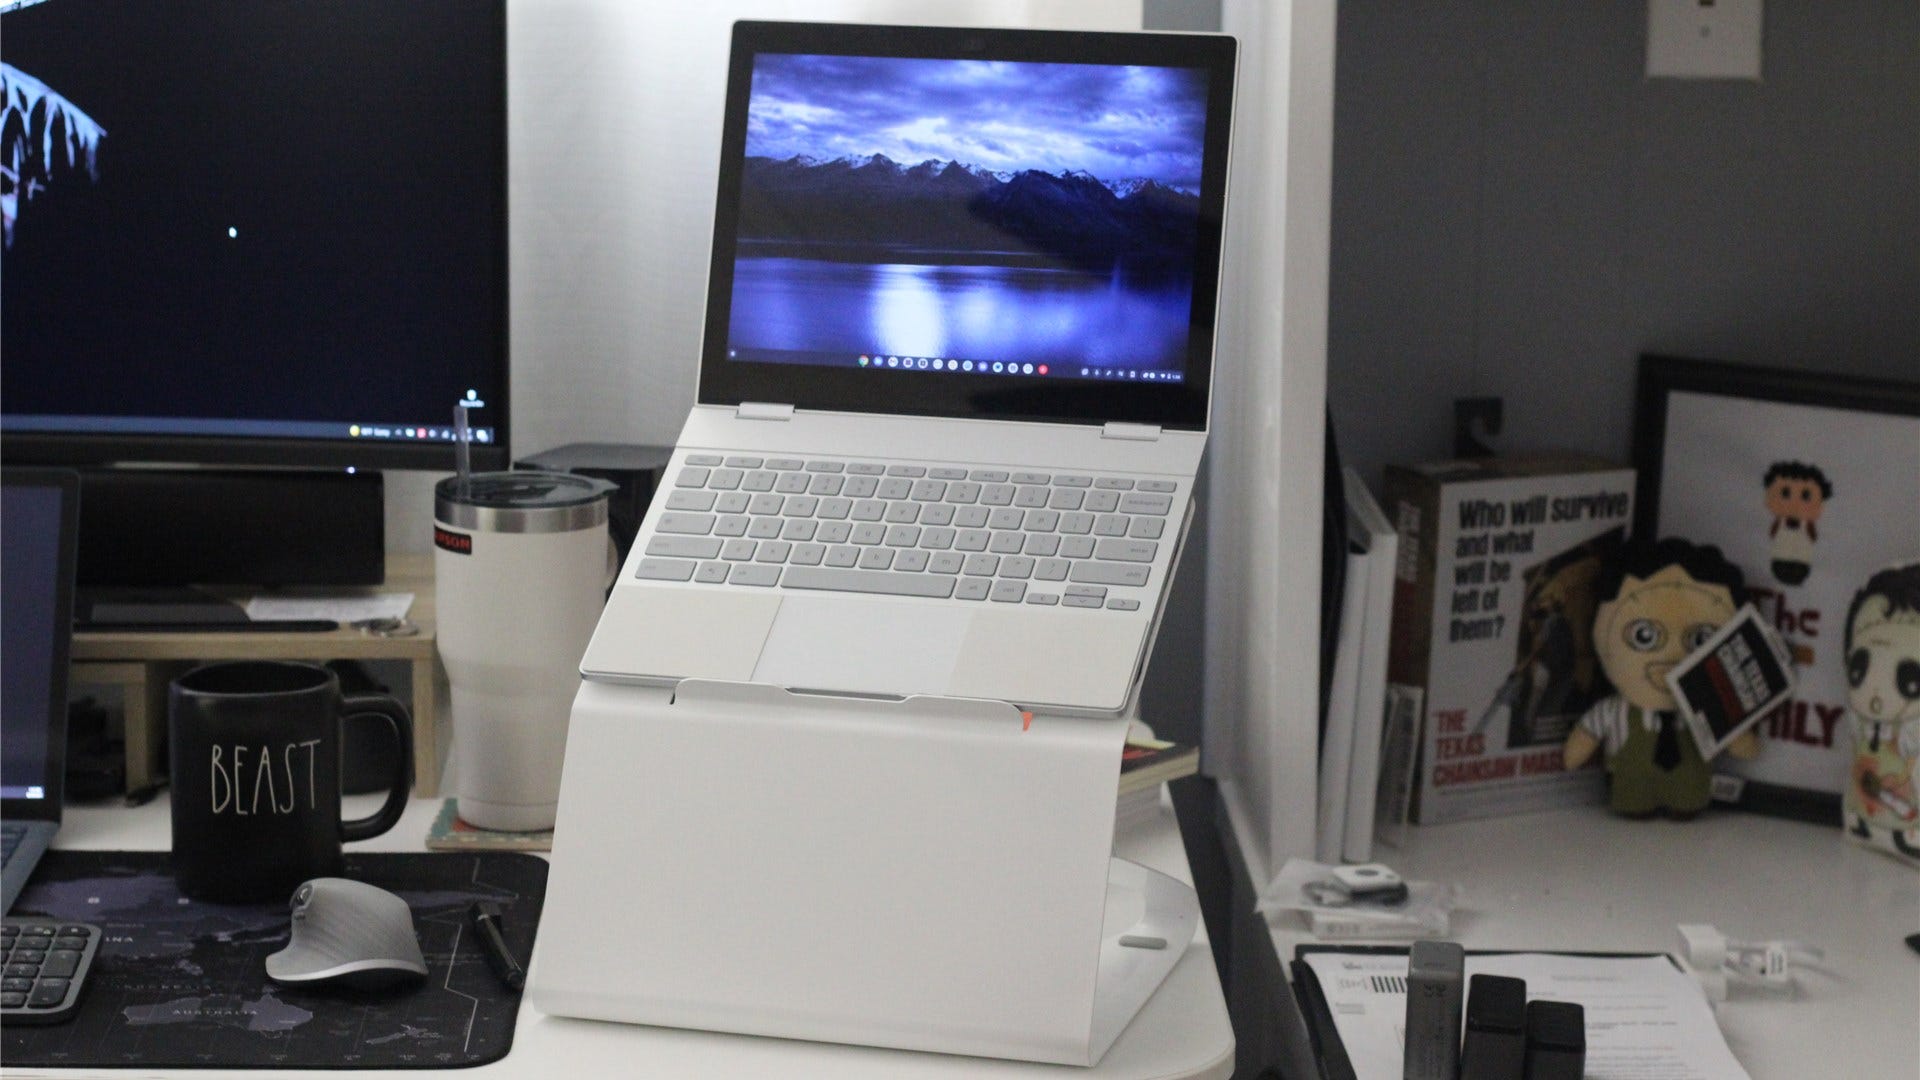 Fluidstance Lift Laptop Stand Review: A Swing and a Miss